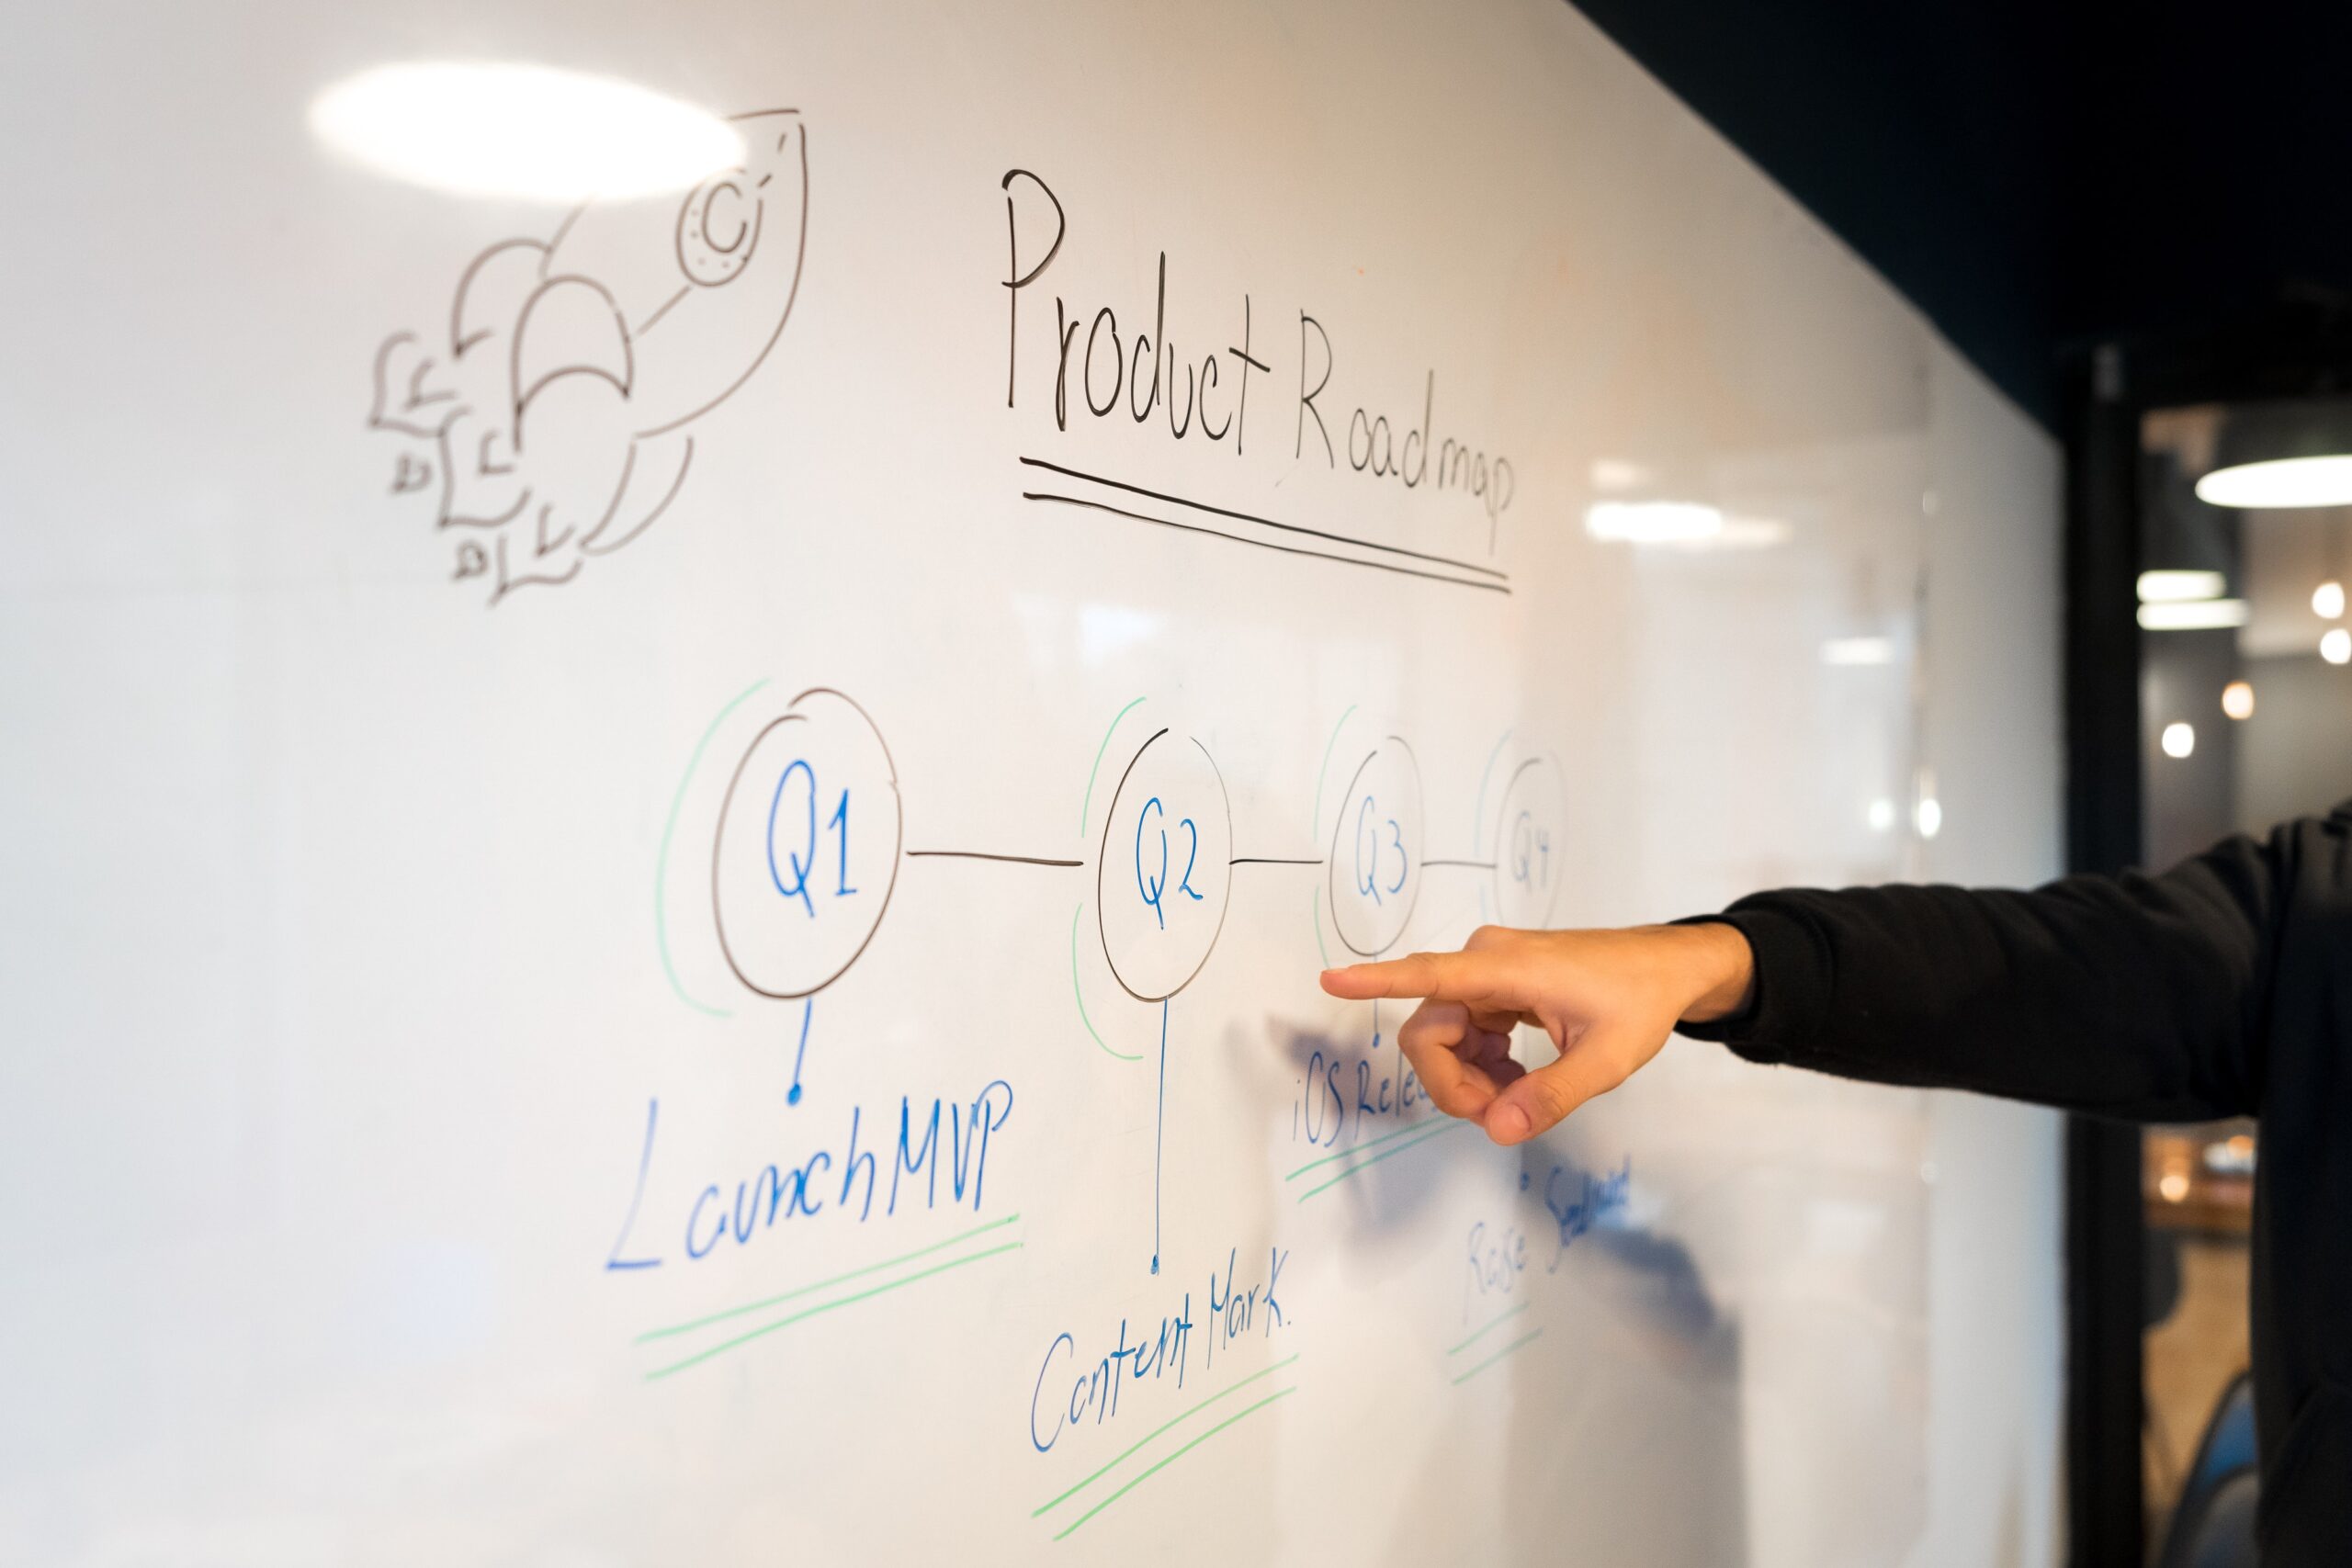 Someone pointing a white board which  is written product roadmap steps, including but not limited to launch mvp and contact mark. 